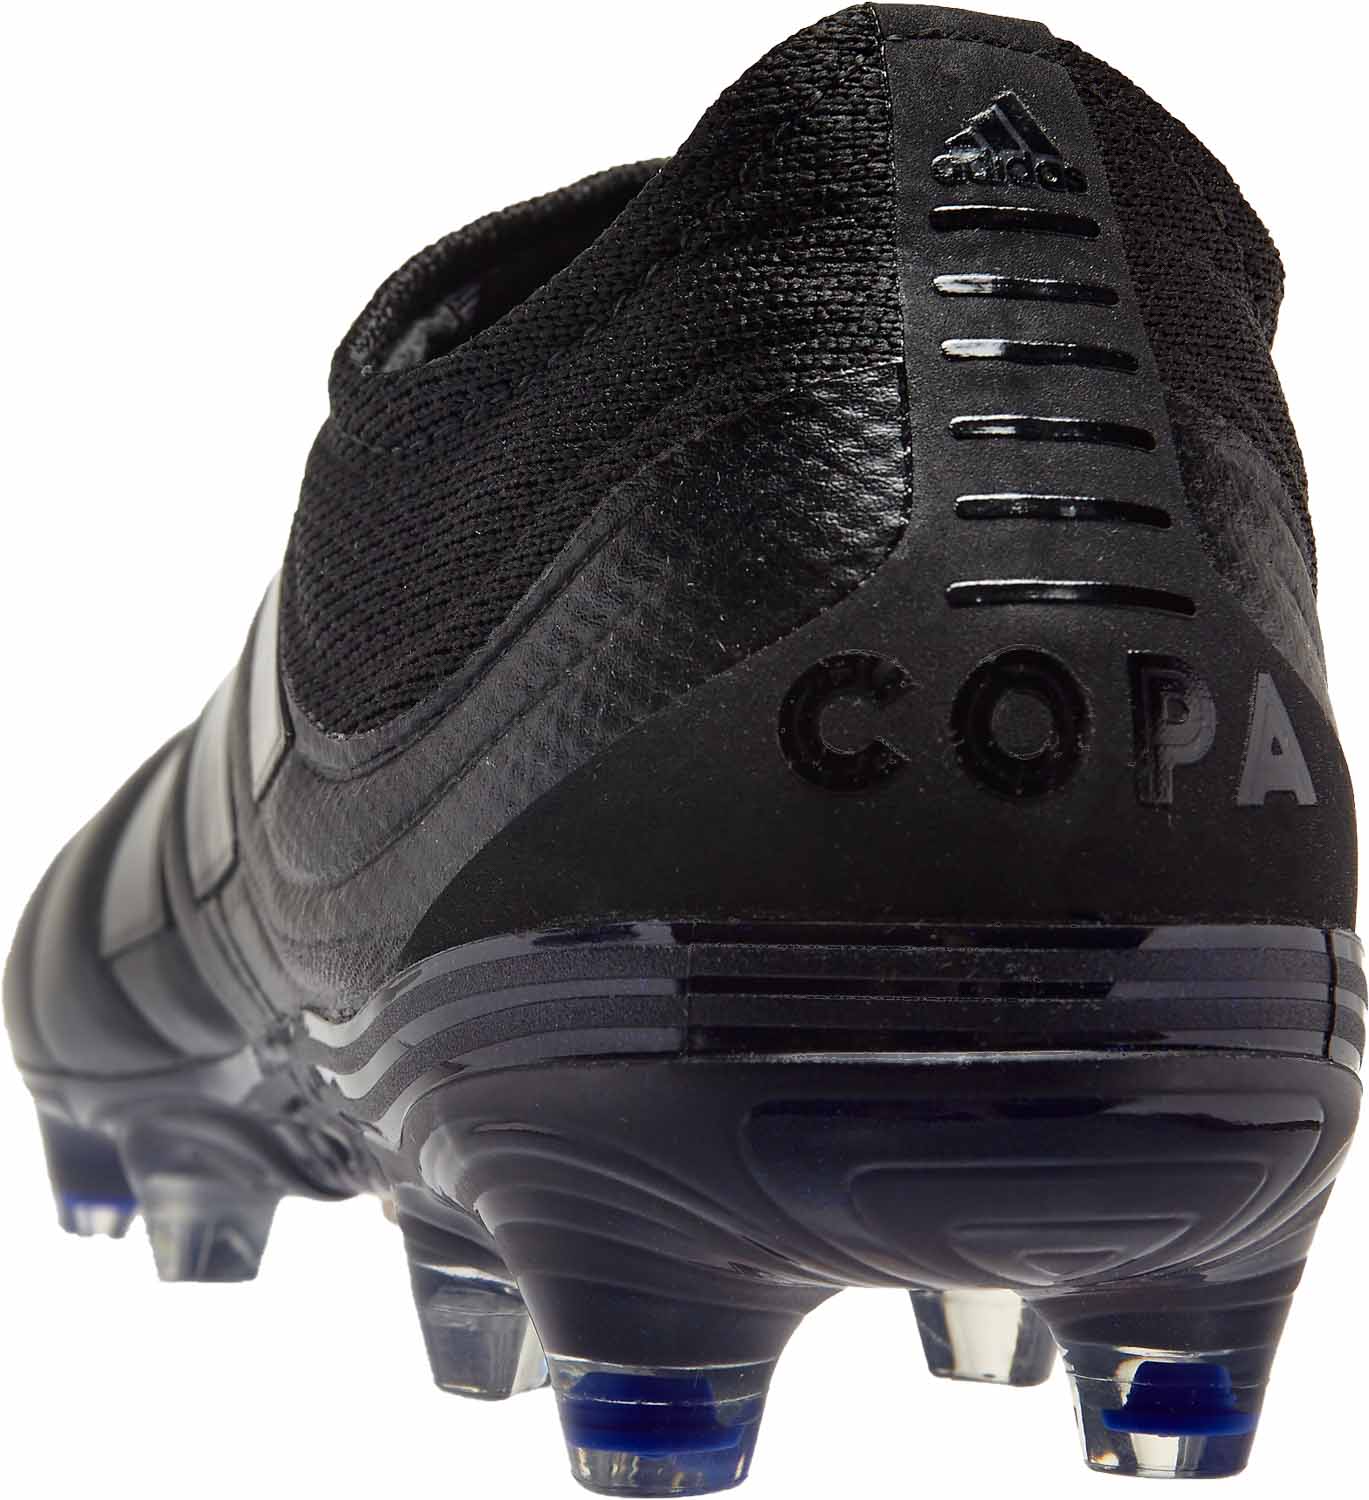 adidas copa 19.1 archetic pack